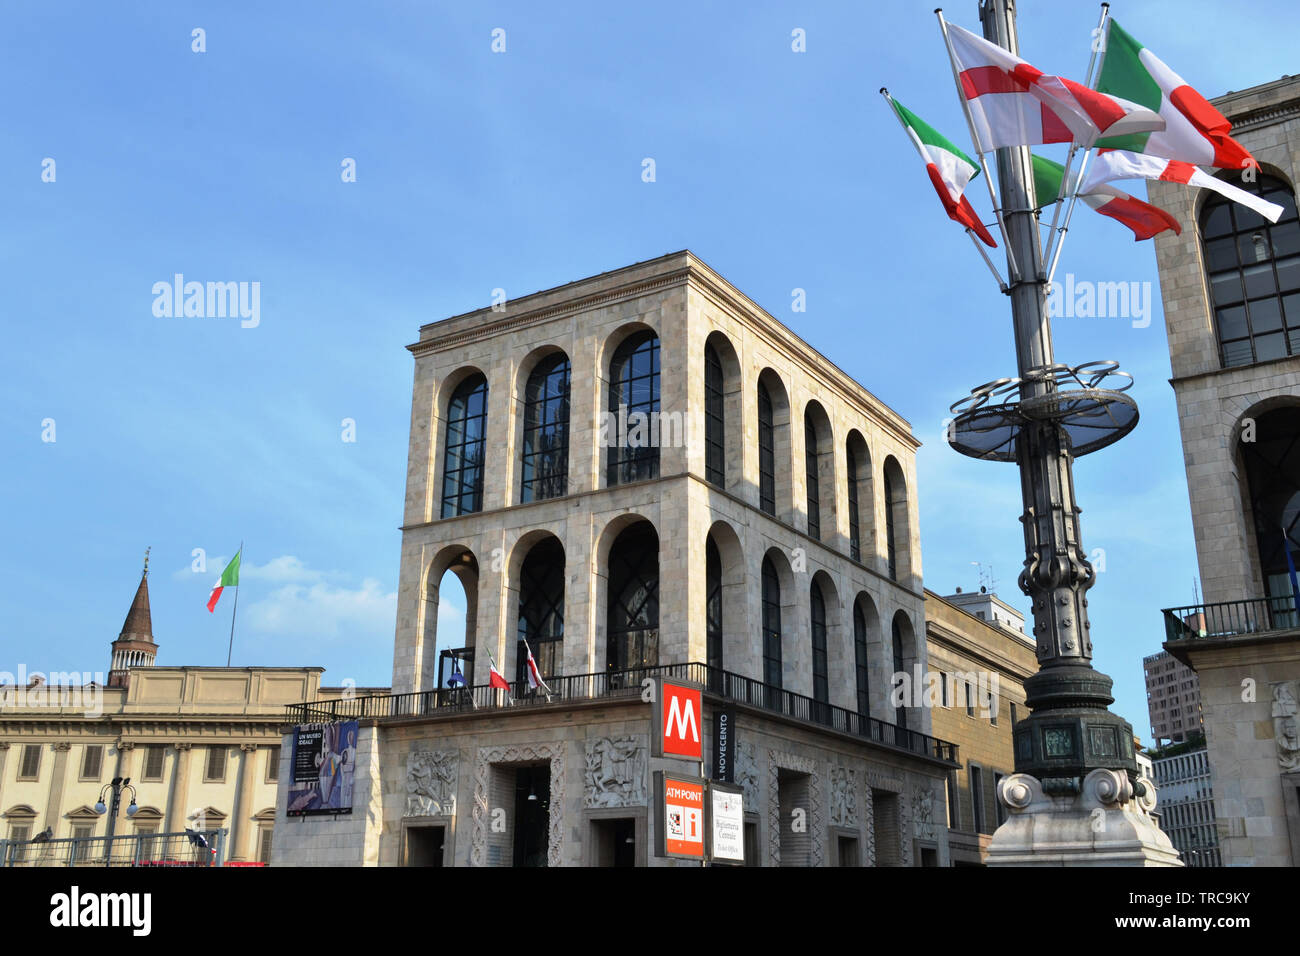 Milan/Italy - June 1, 2015: View to Royal Palace, XIX century museum and flagpole with flags on it at Duomo square in sunny summer day. Stock Photo